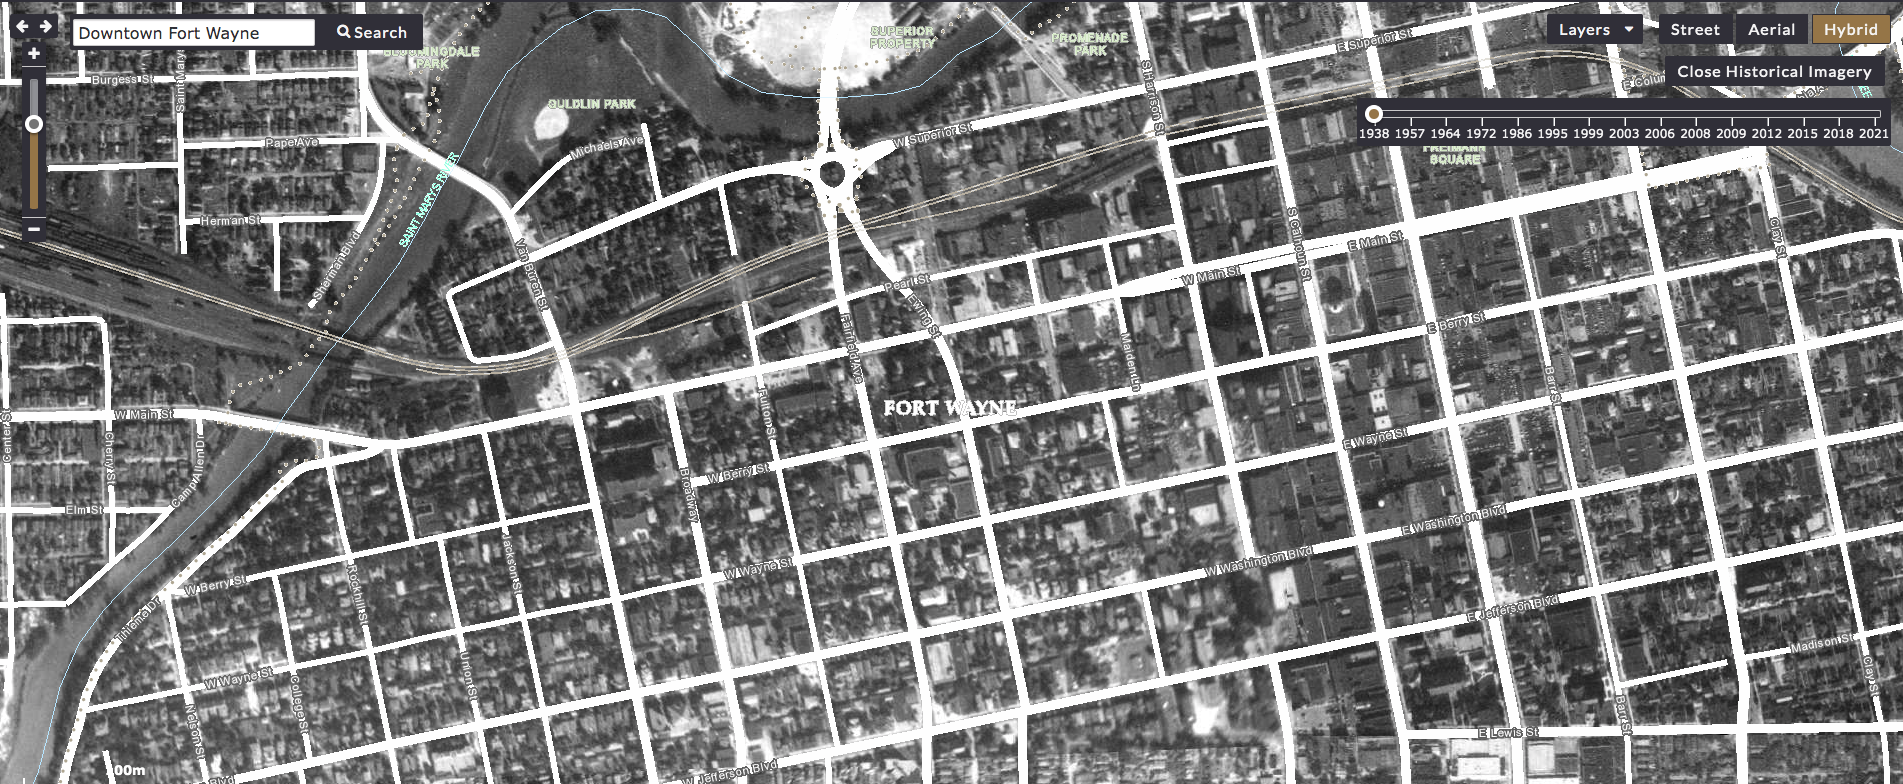 The density along throughout Downtown Fort Wayne is evident in 1938.